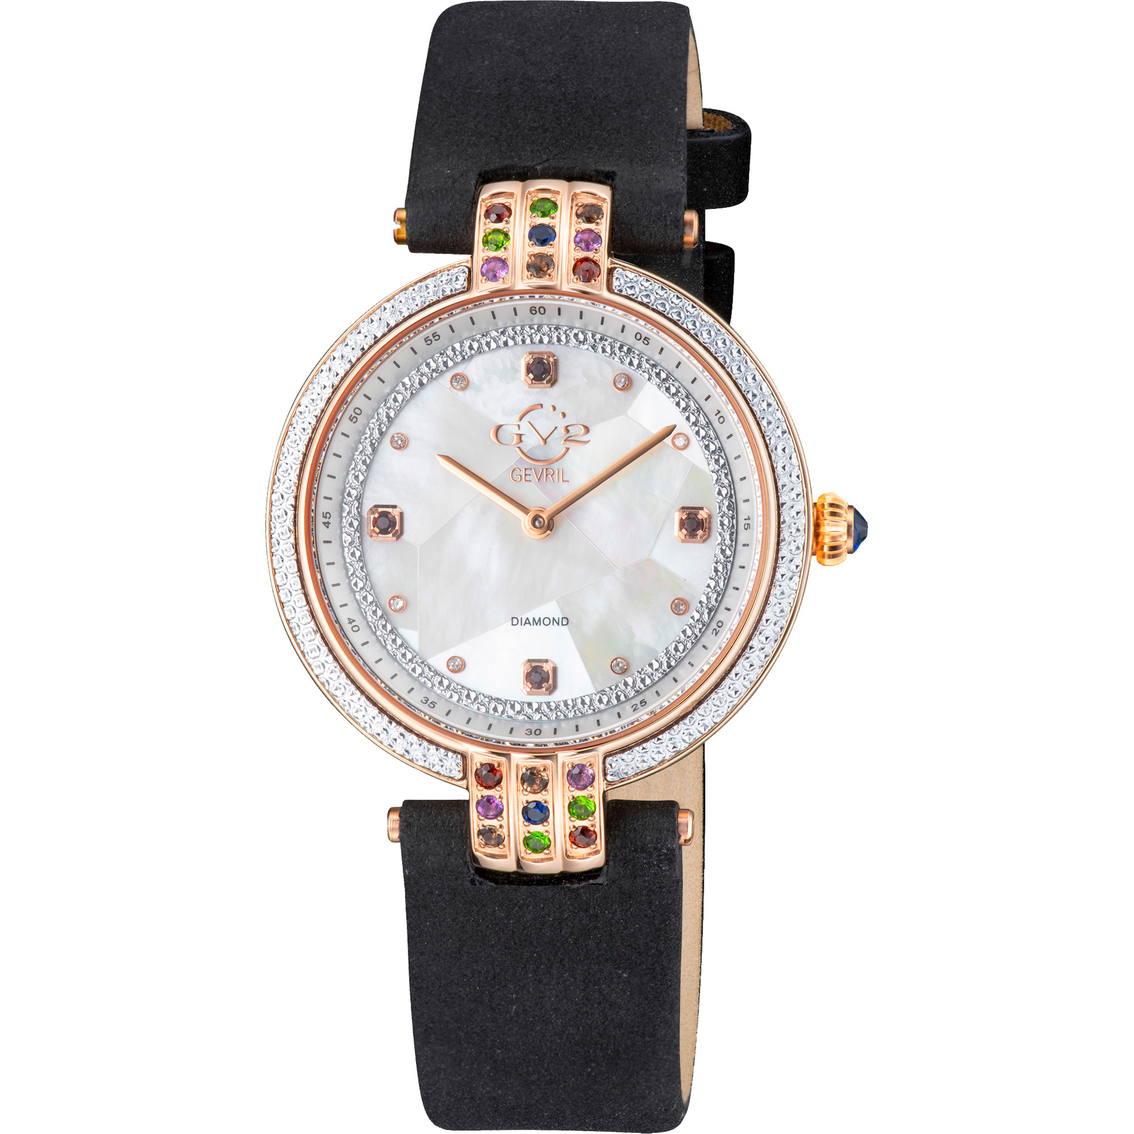 Gevril Women's Gv2 Matera Diamond Mother Of Pearl Leather Watch ...